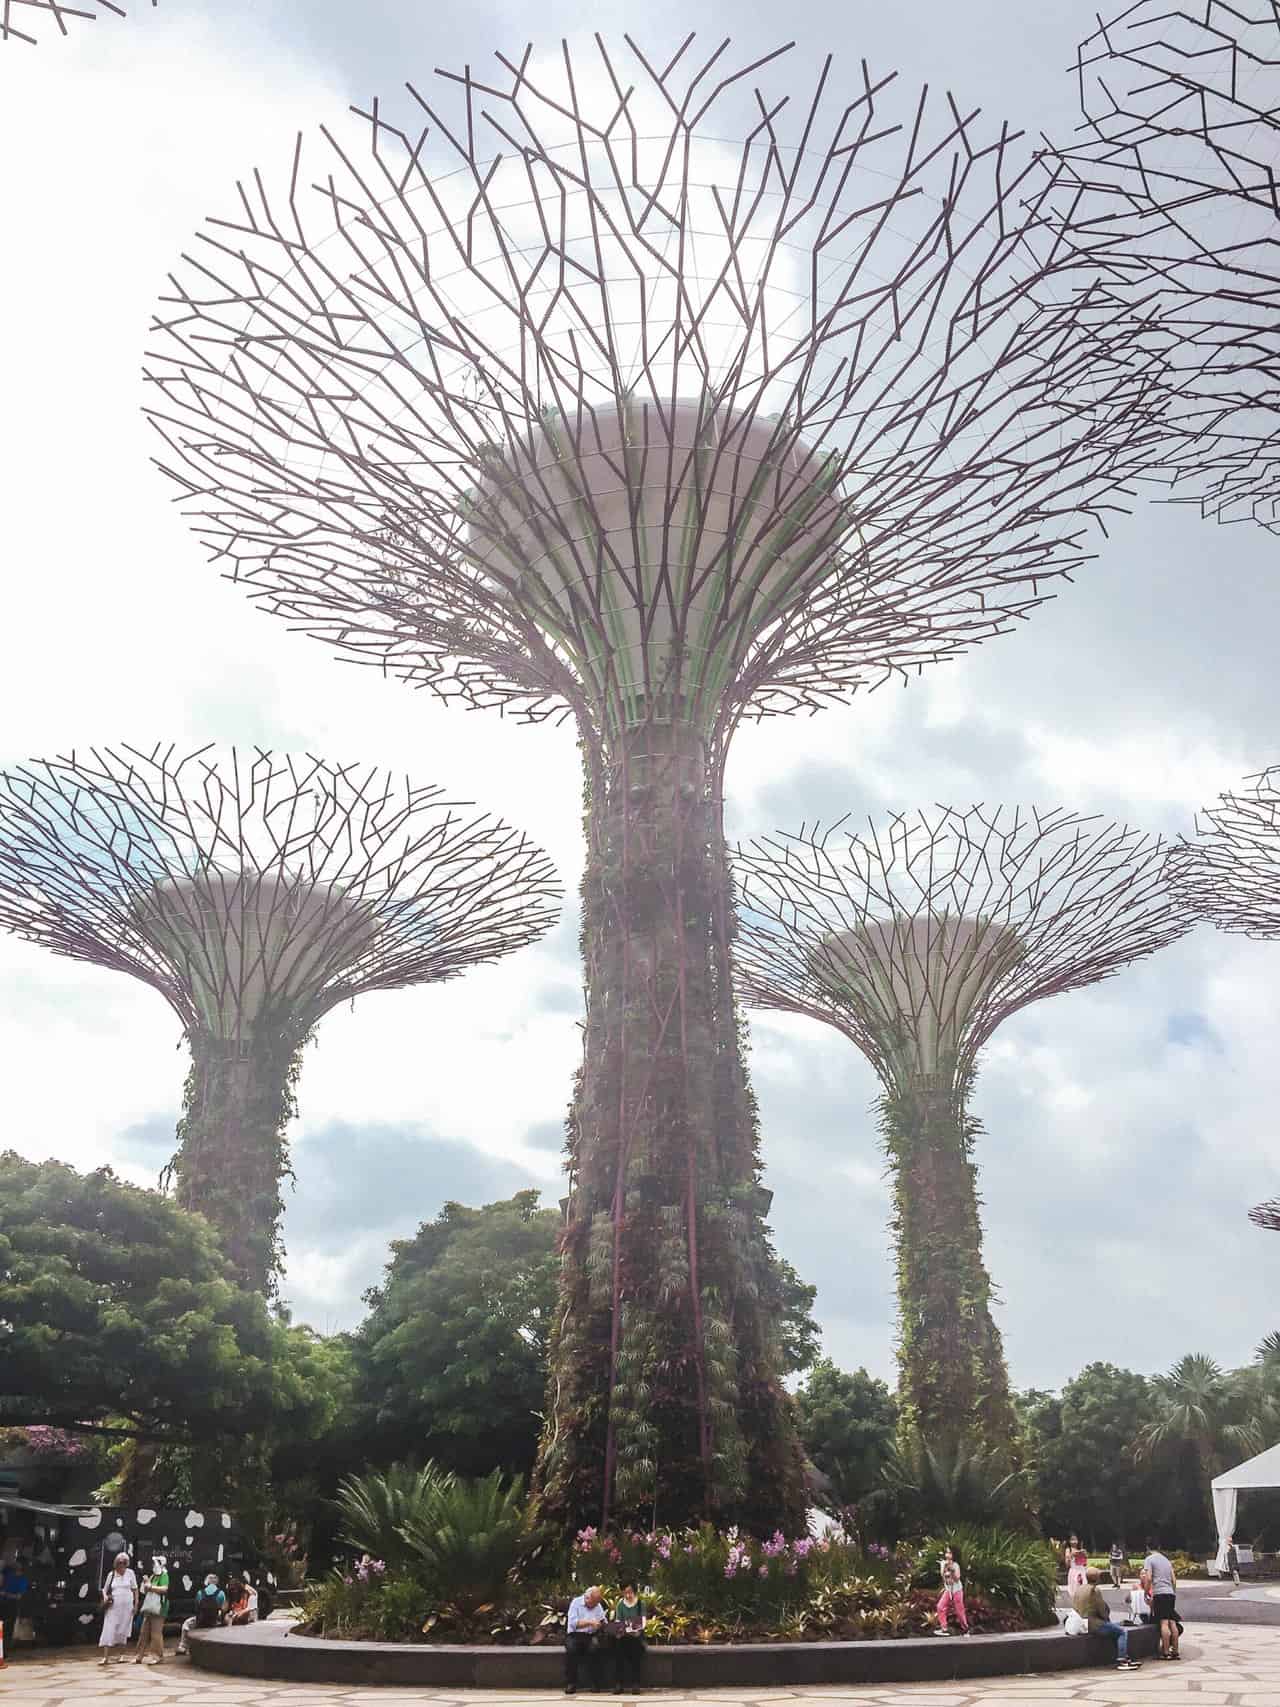 Supergrove trees at Gardens by the Bay in Singapore, Southeast Asia